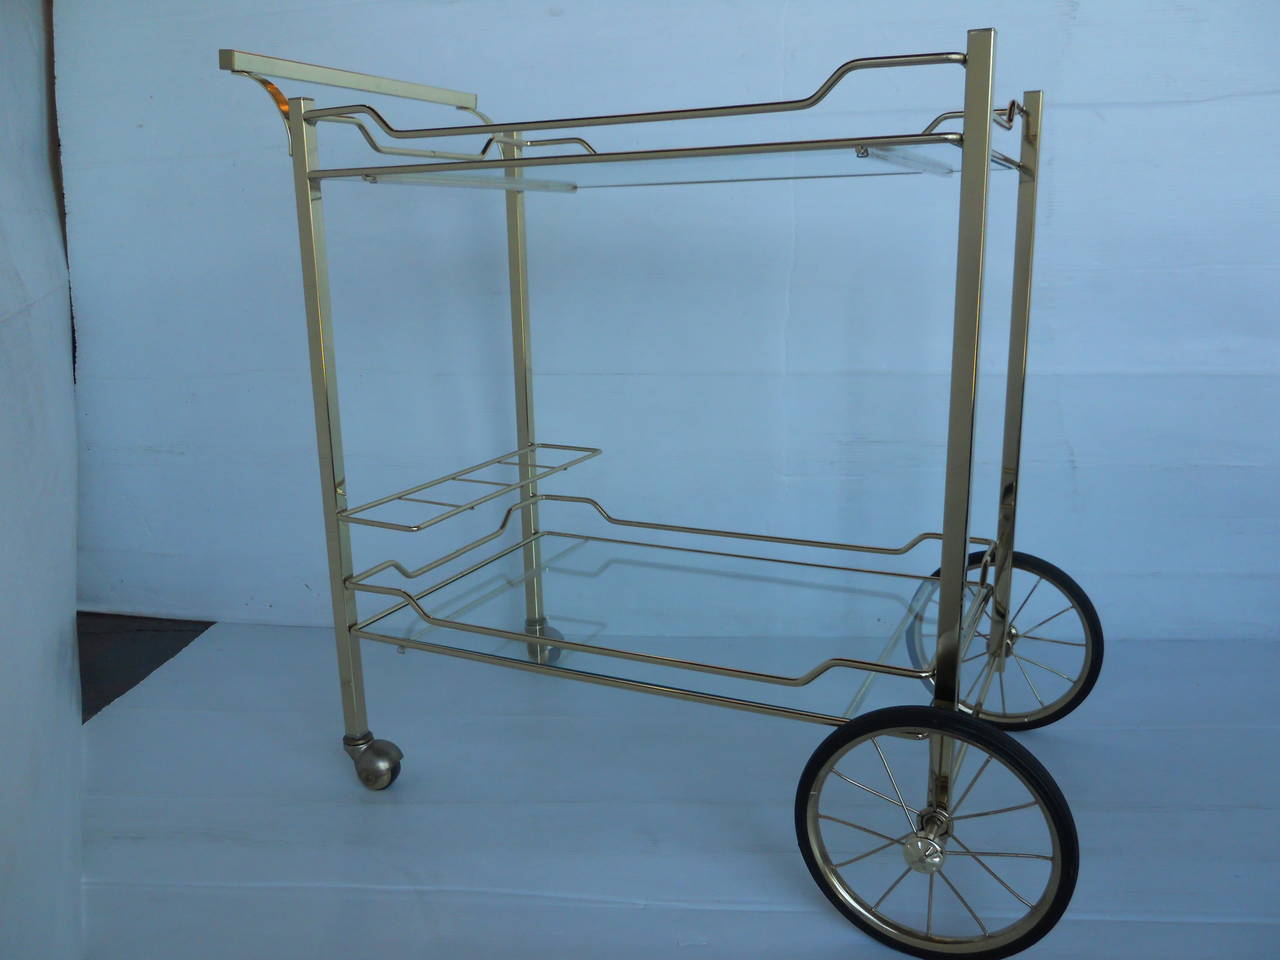 A Mid-Century brass bar cart. Has two levels and a brass gallery to hold bottles on the lower level.